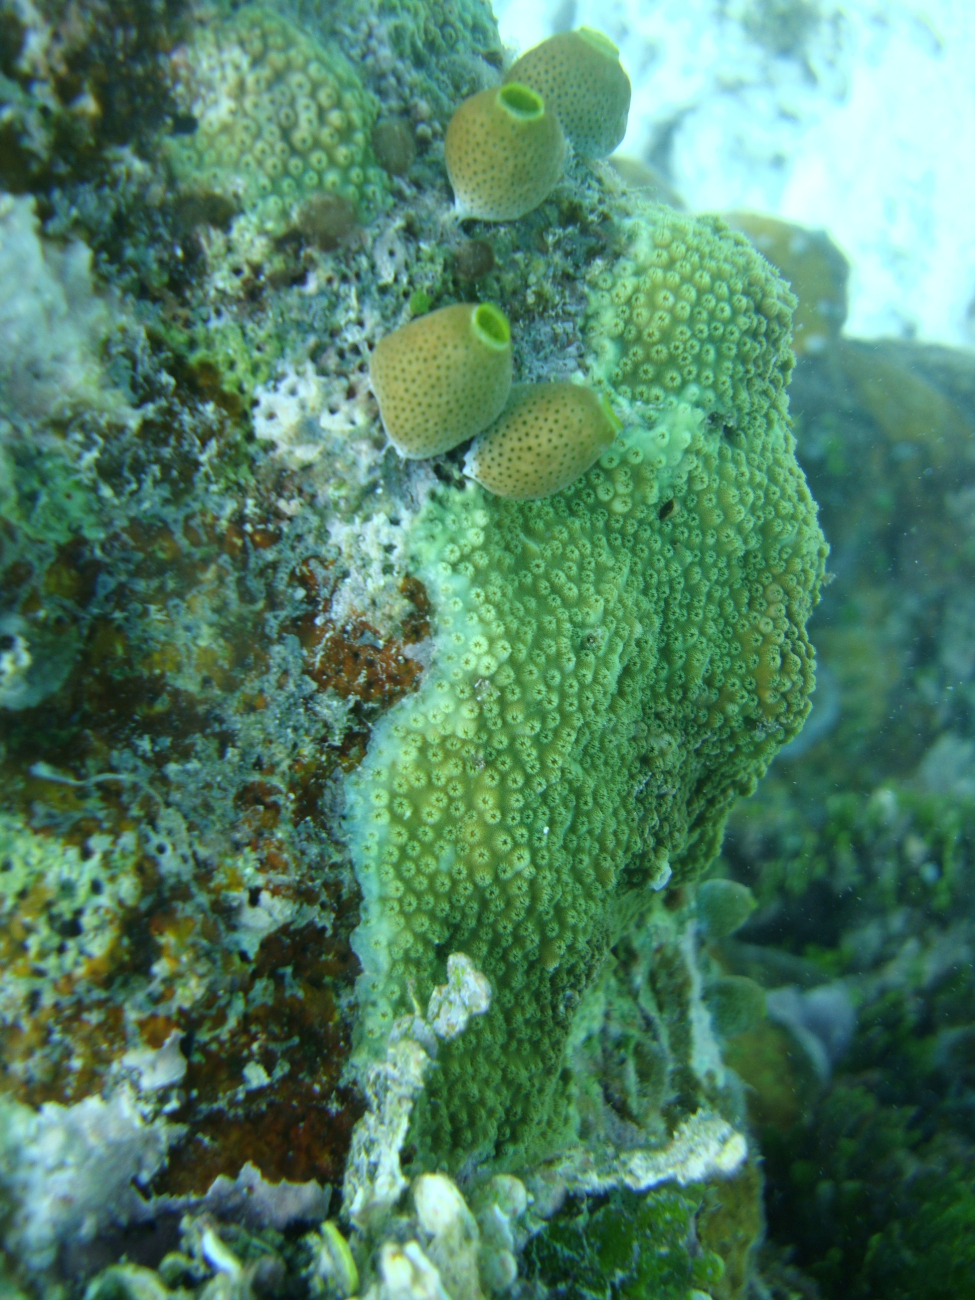 Star coral with tunicates